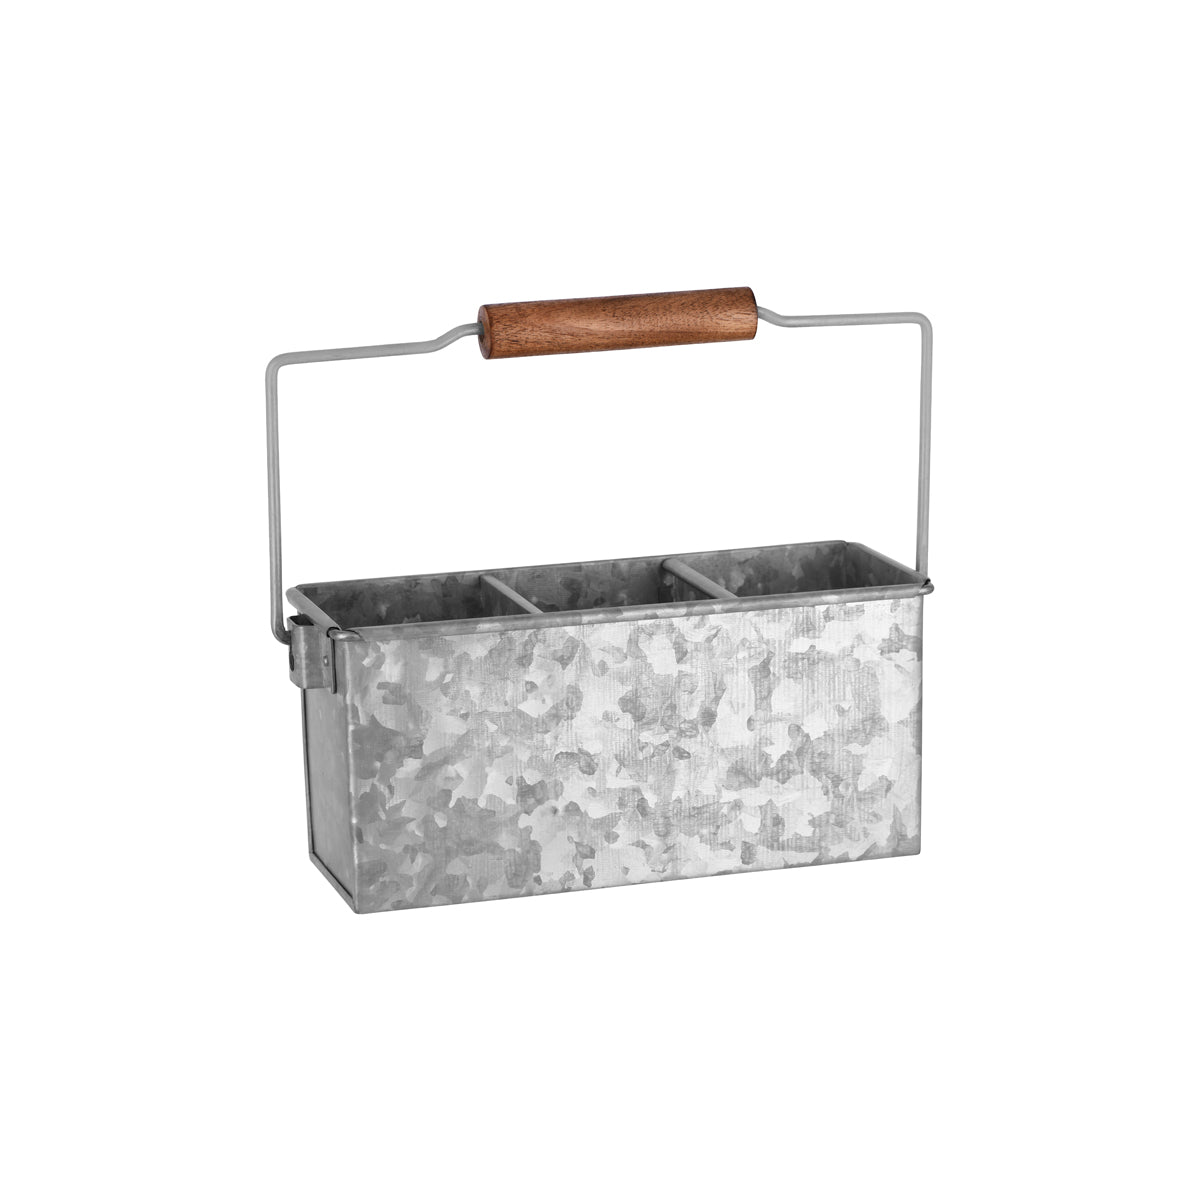 78695 Chef Inox Coney Island 3-Compartment Caddy with Handle Galvanised 250x90x115mm Tomkin Australia Hospitality Supplies